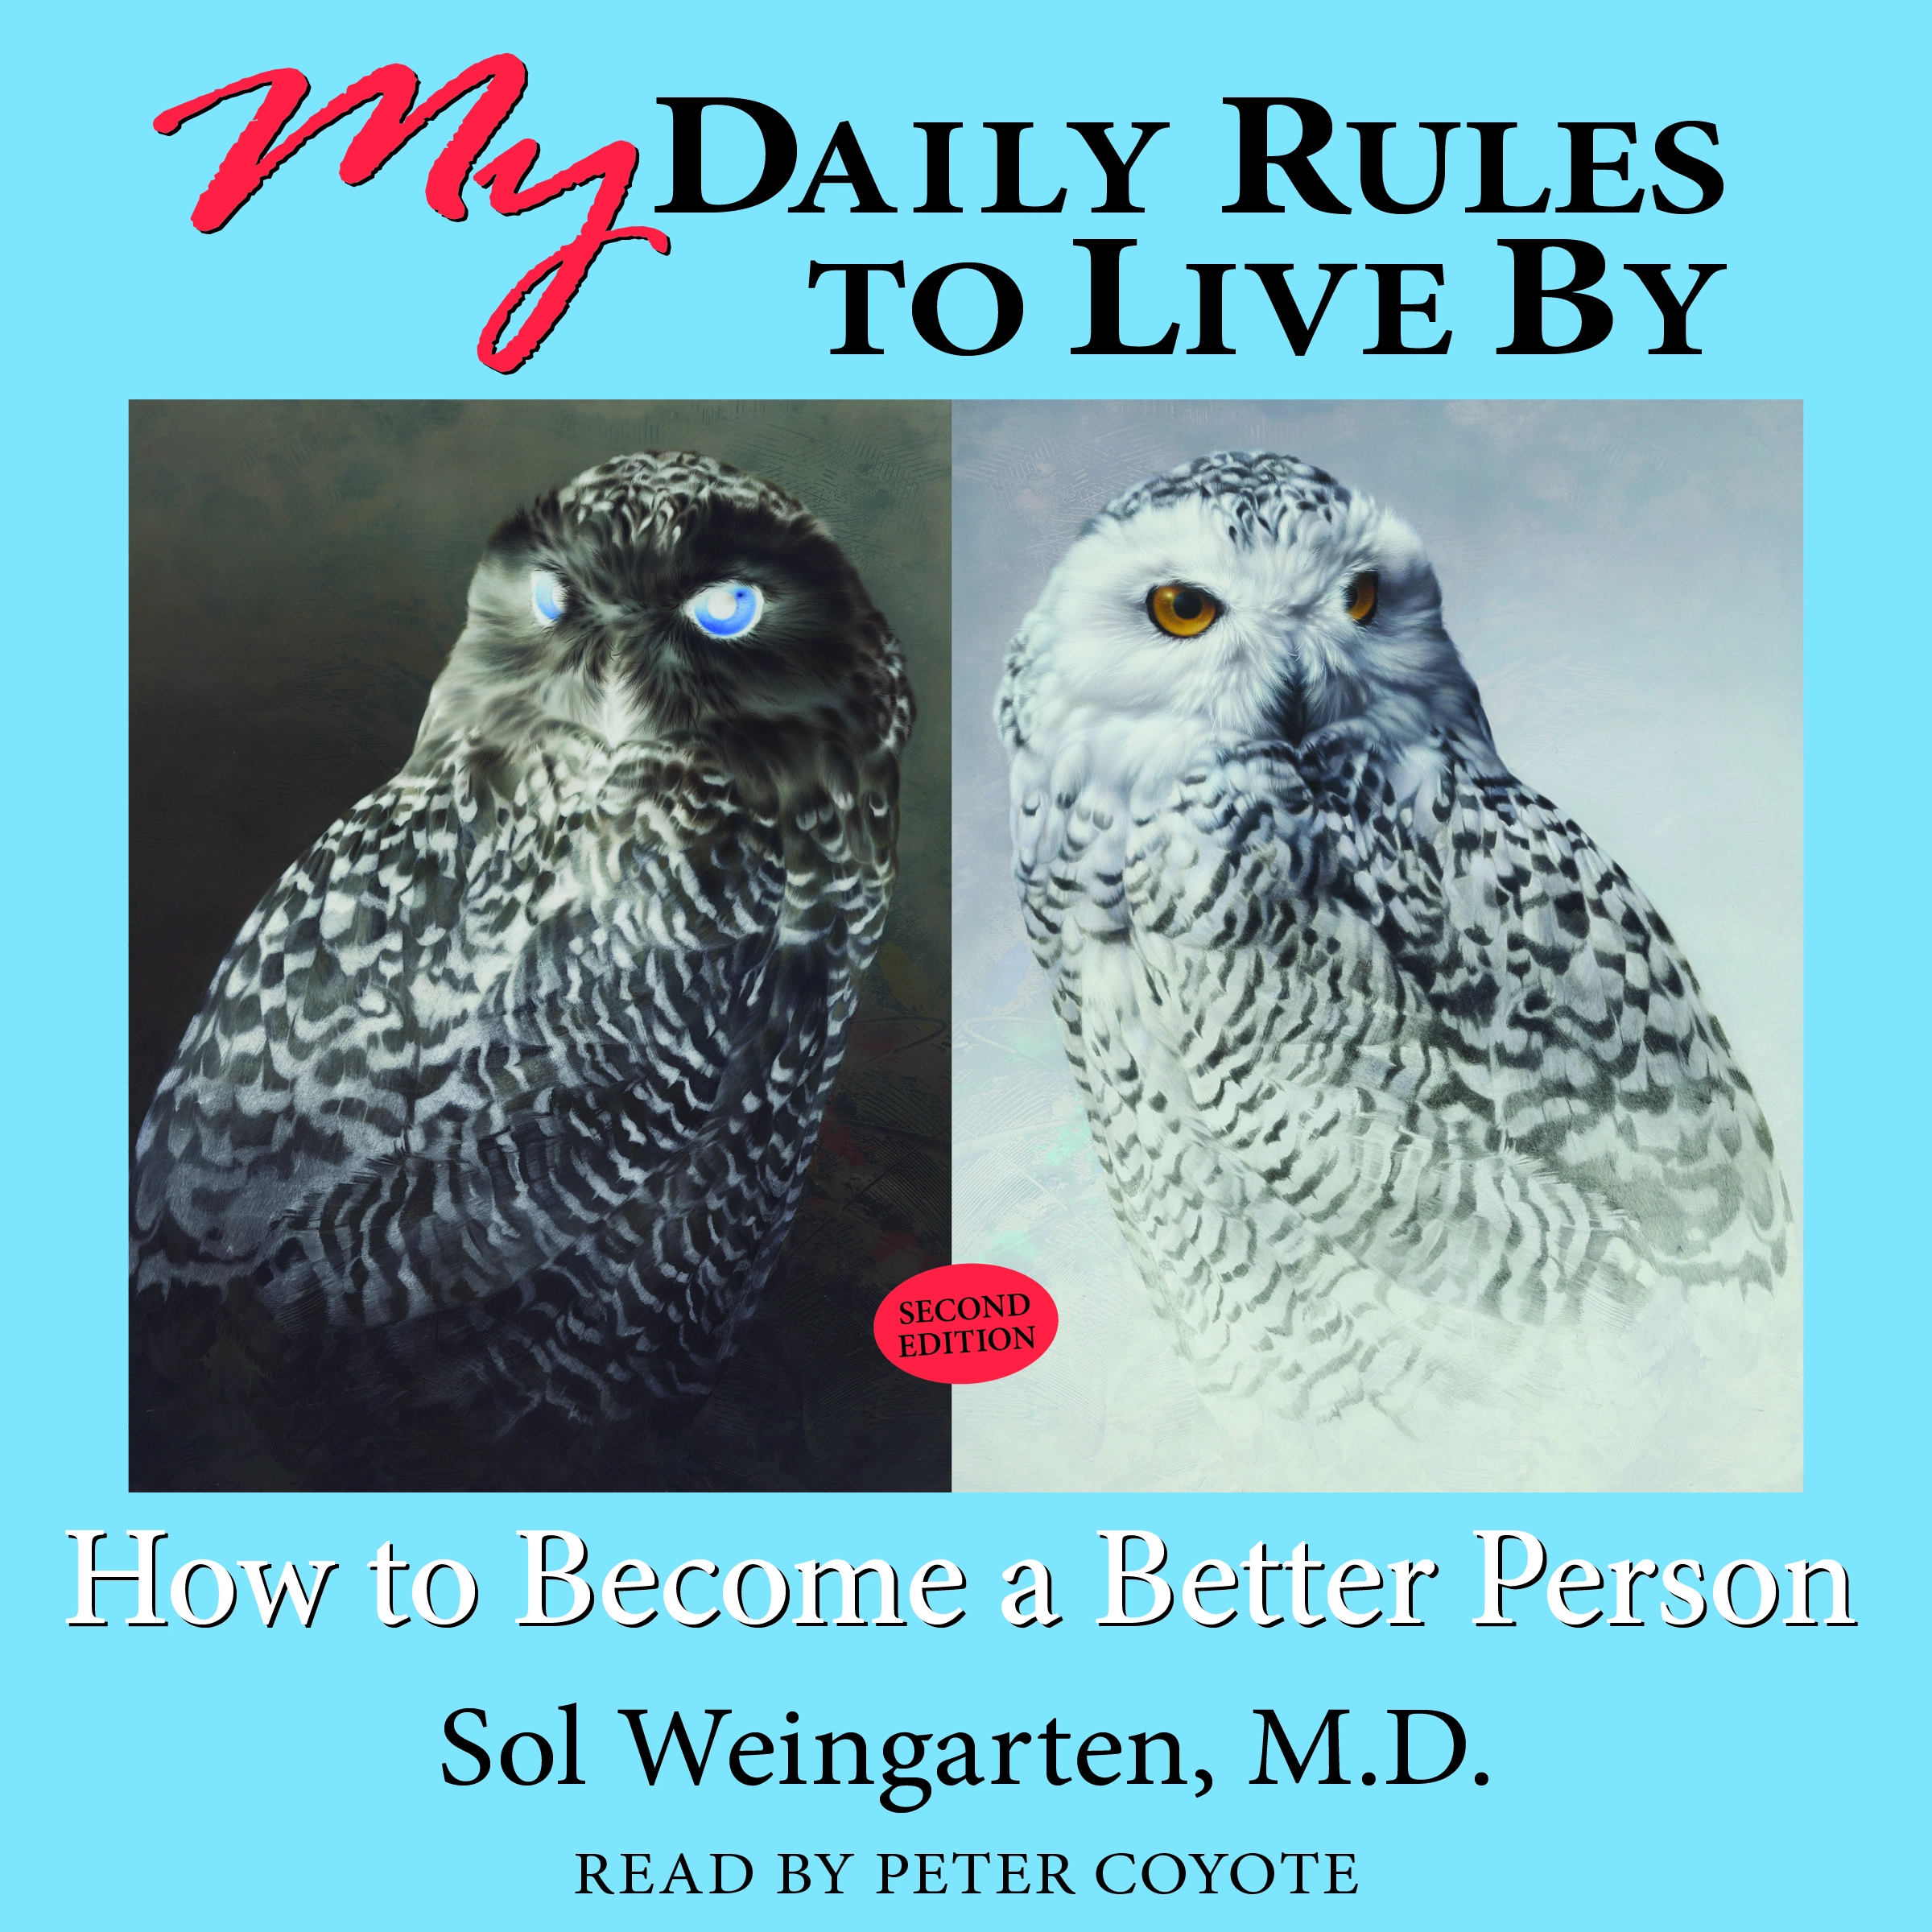 My Daily Rules to Live By: How to Become a Better Person Audiobook by M.D.